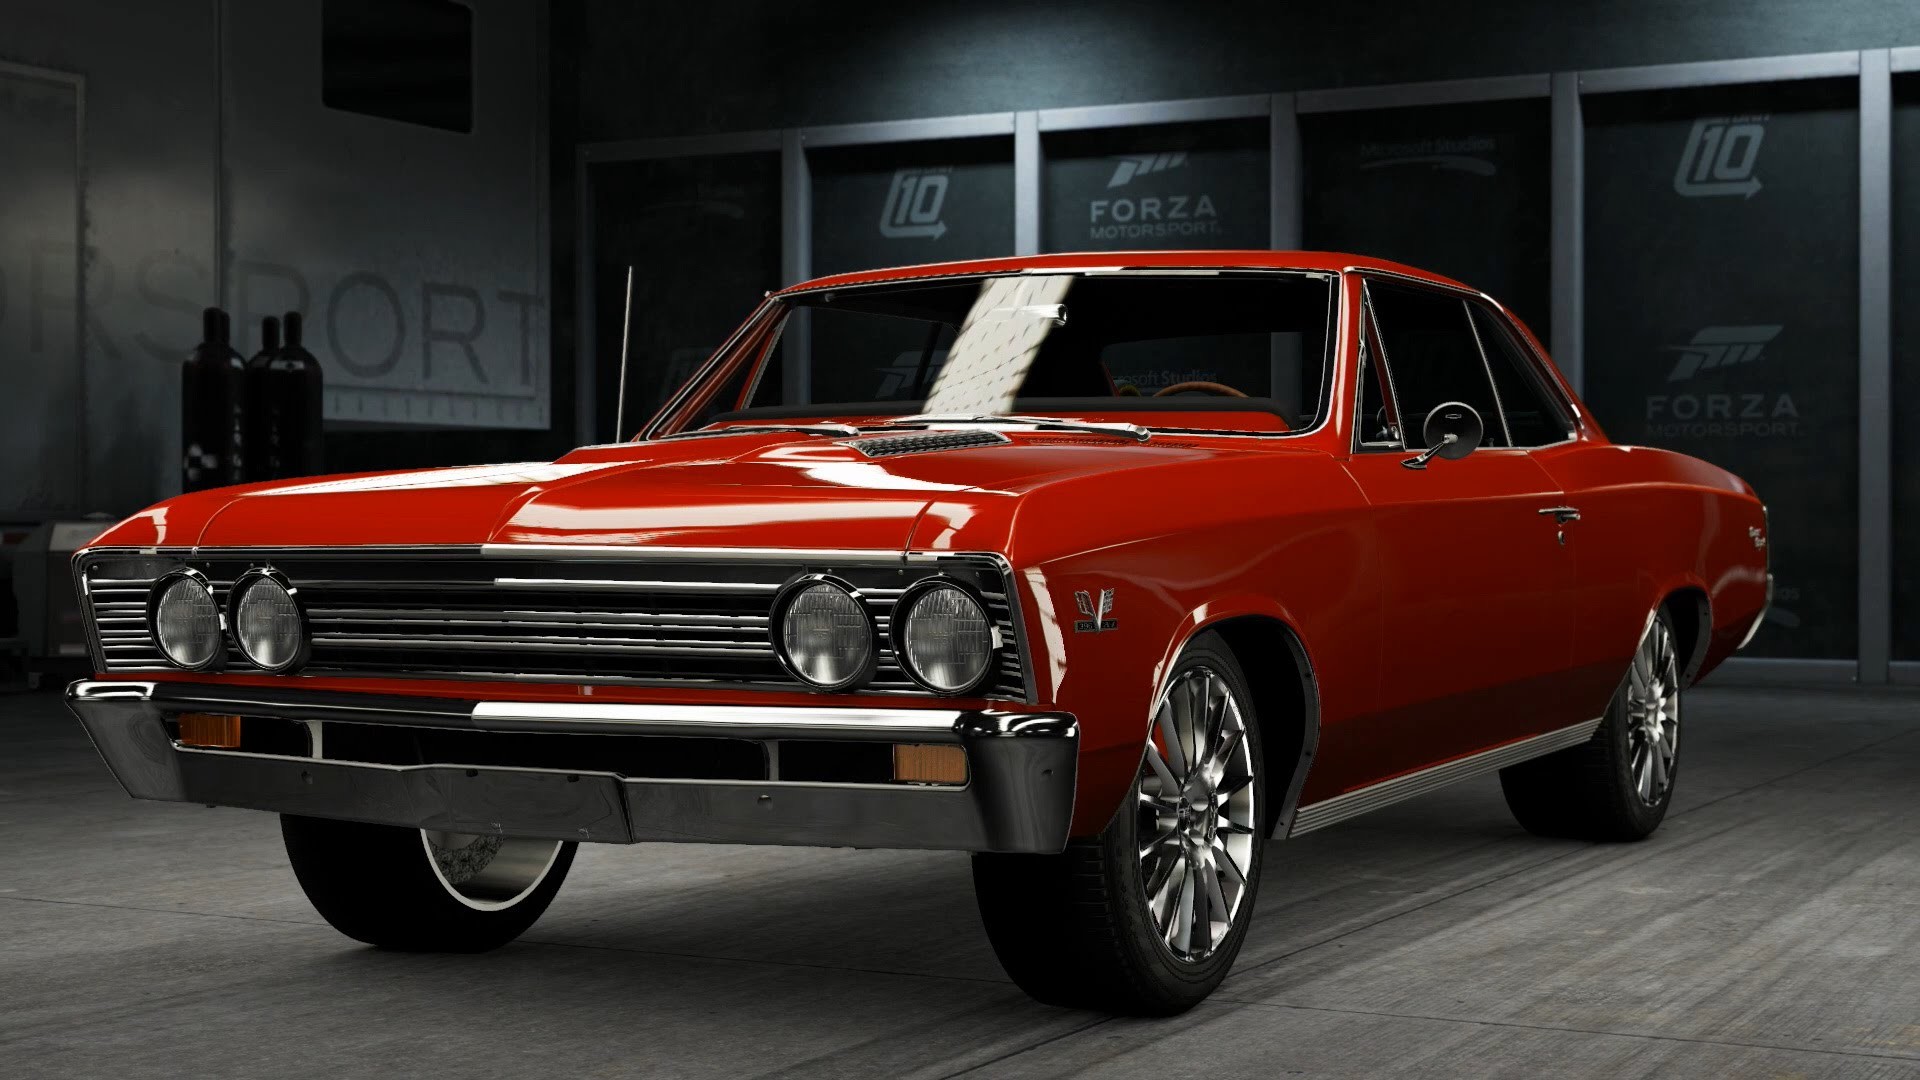 1967 Chevelle Ss The Ss Stands For So Sexy - 67 Chevelle Ss - HD Wallpaper 